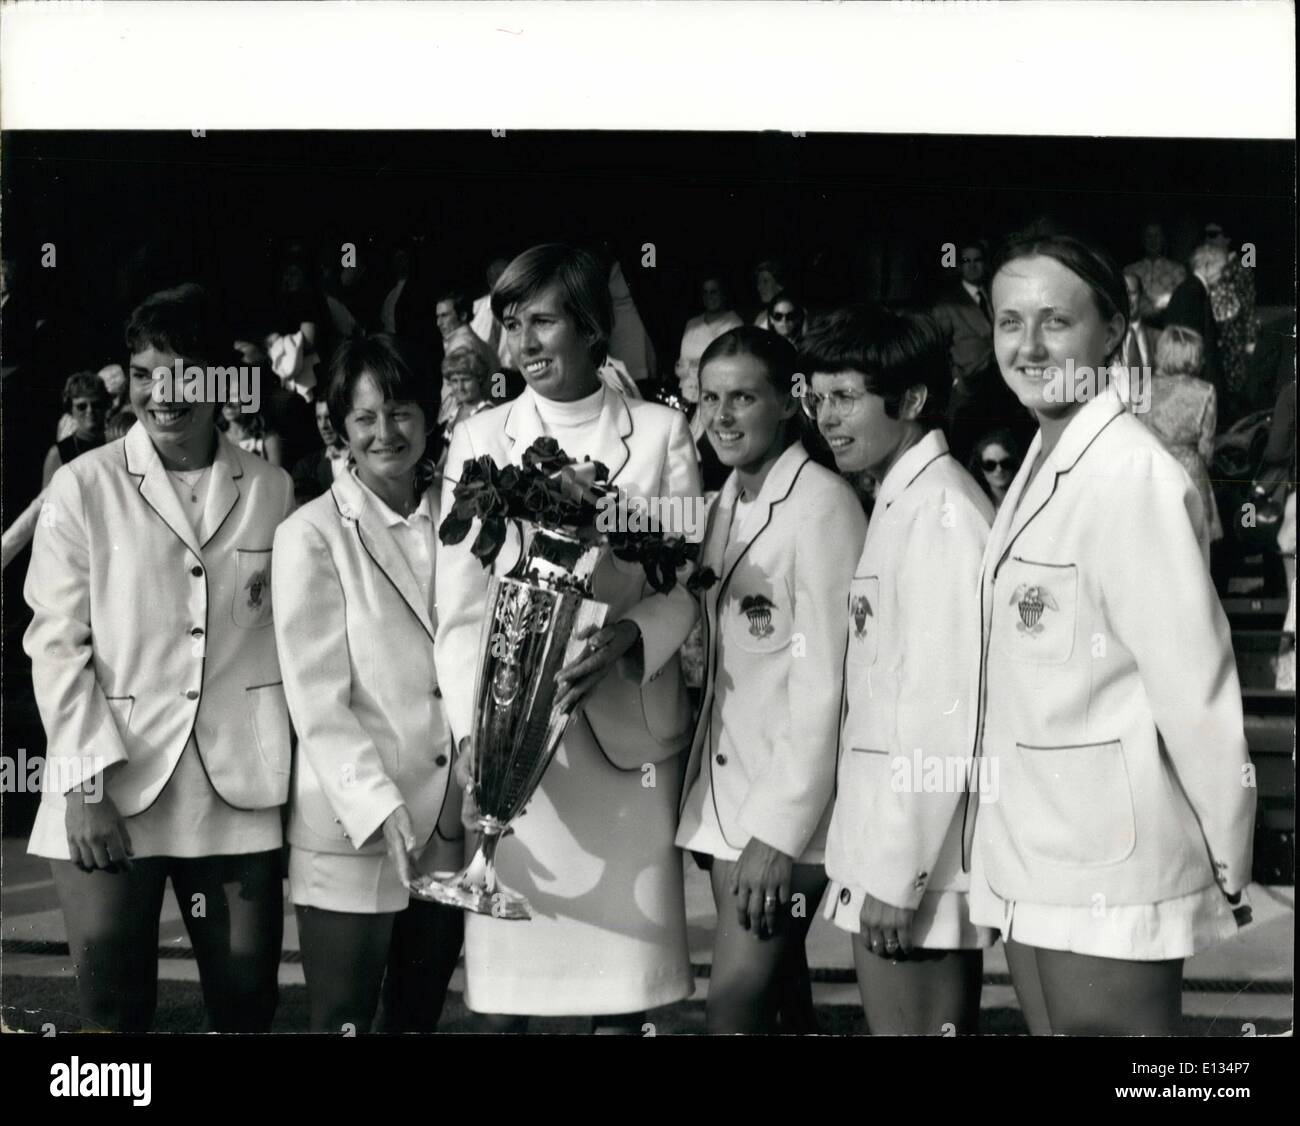 Feb. 26, 2012 - Wightman Cup at Wimbledon USA beat England 4-3.: Photo shows the winning Wightman Cup team with the trophy after beat Britain by 4-3 at Wimbledon today. L-R. Miss Heldman, Miss Richey, Doris Hart, Capt, Miss Curtis, Billie-Jean King, and Miss Bartkowicz. Stock Photo